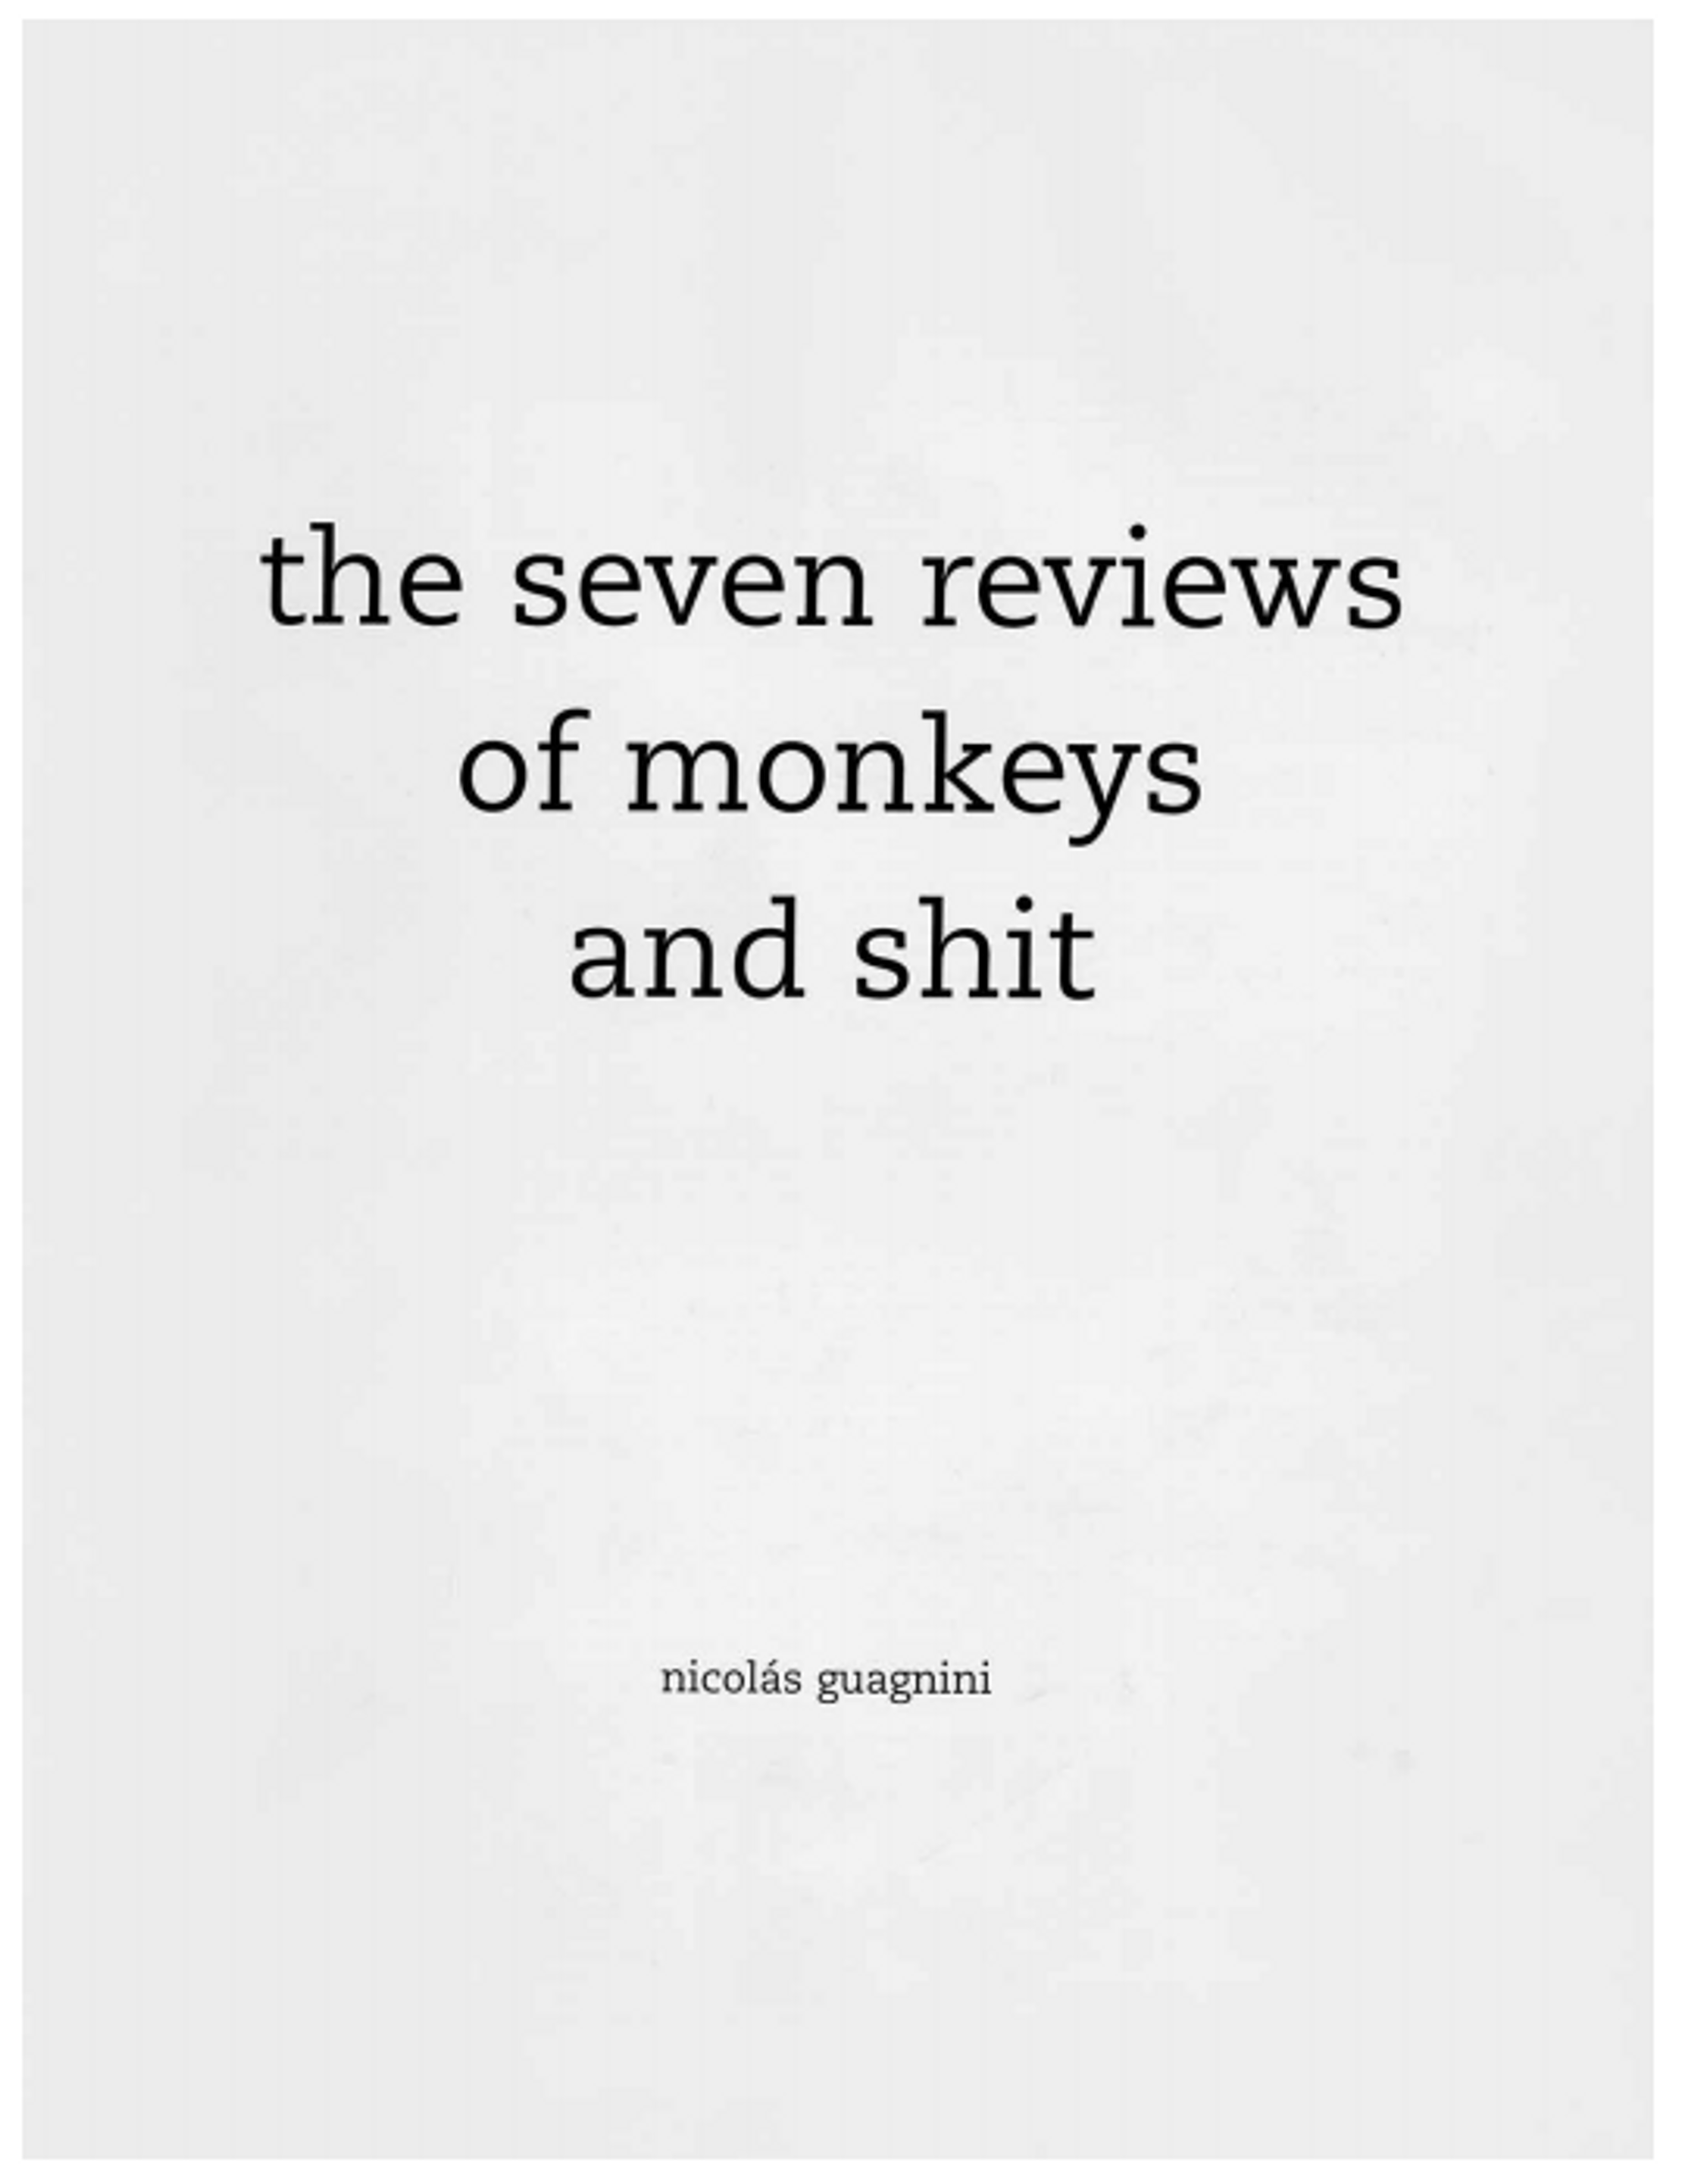 Detail view of The Seven Reviews of Monkeys and Shit against a plain gray background